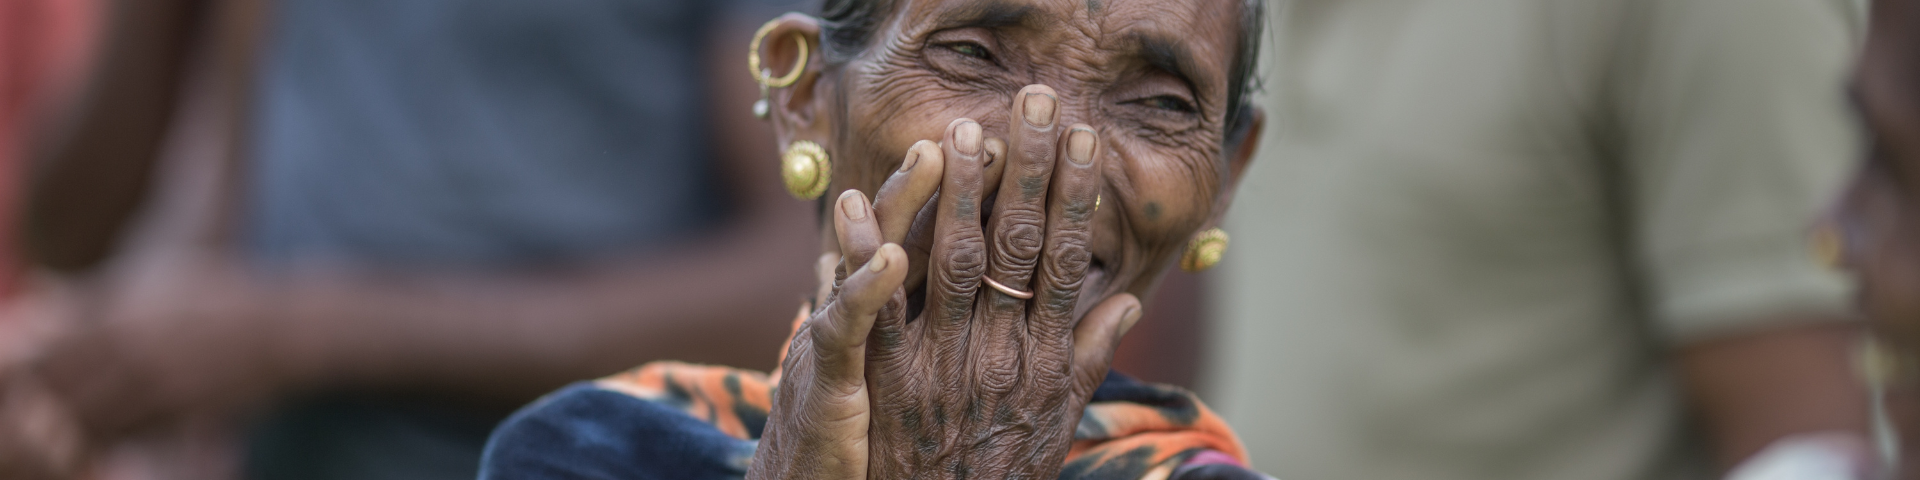 An overjoyed old woman smiling while covering her mouth with her hands